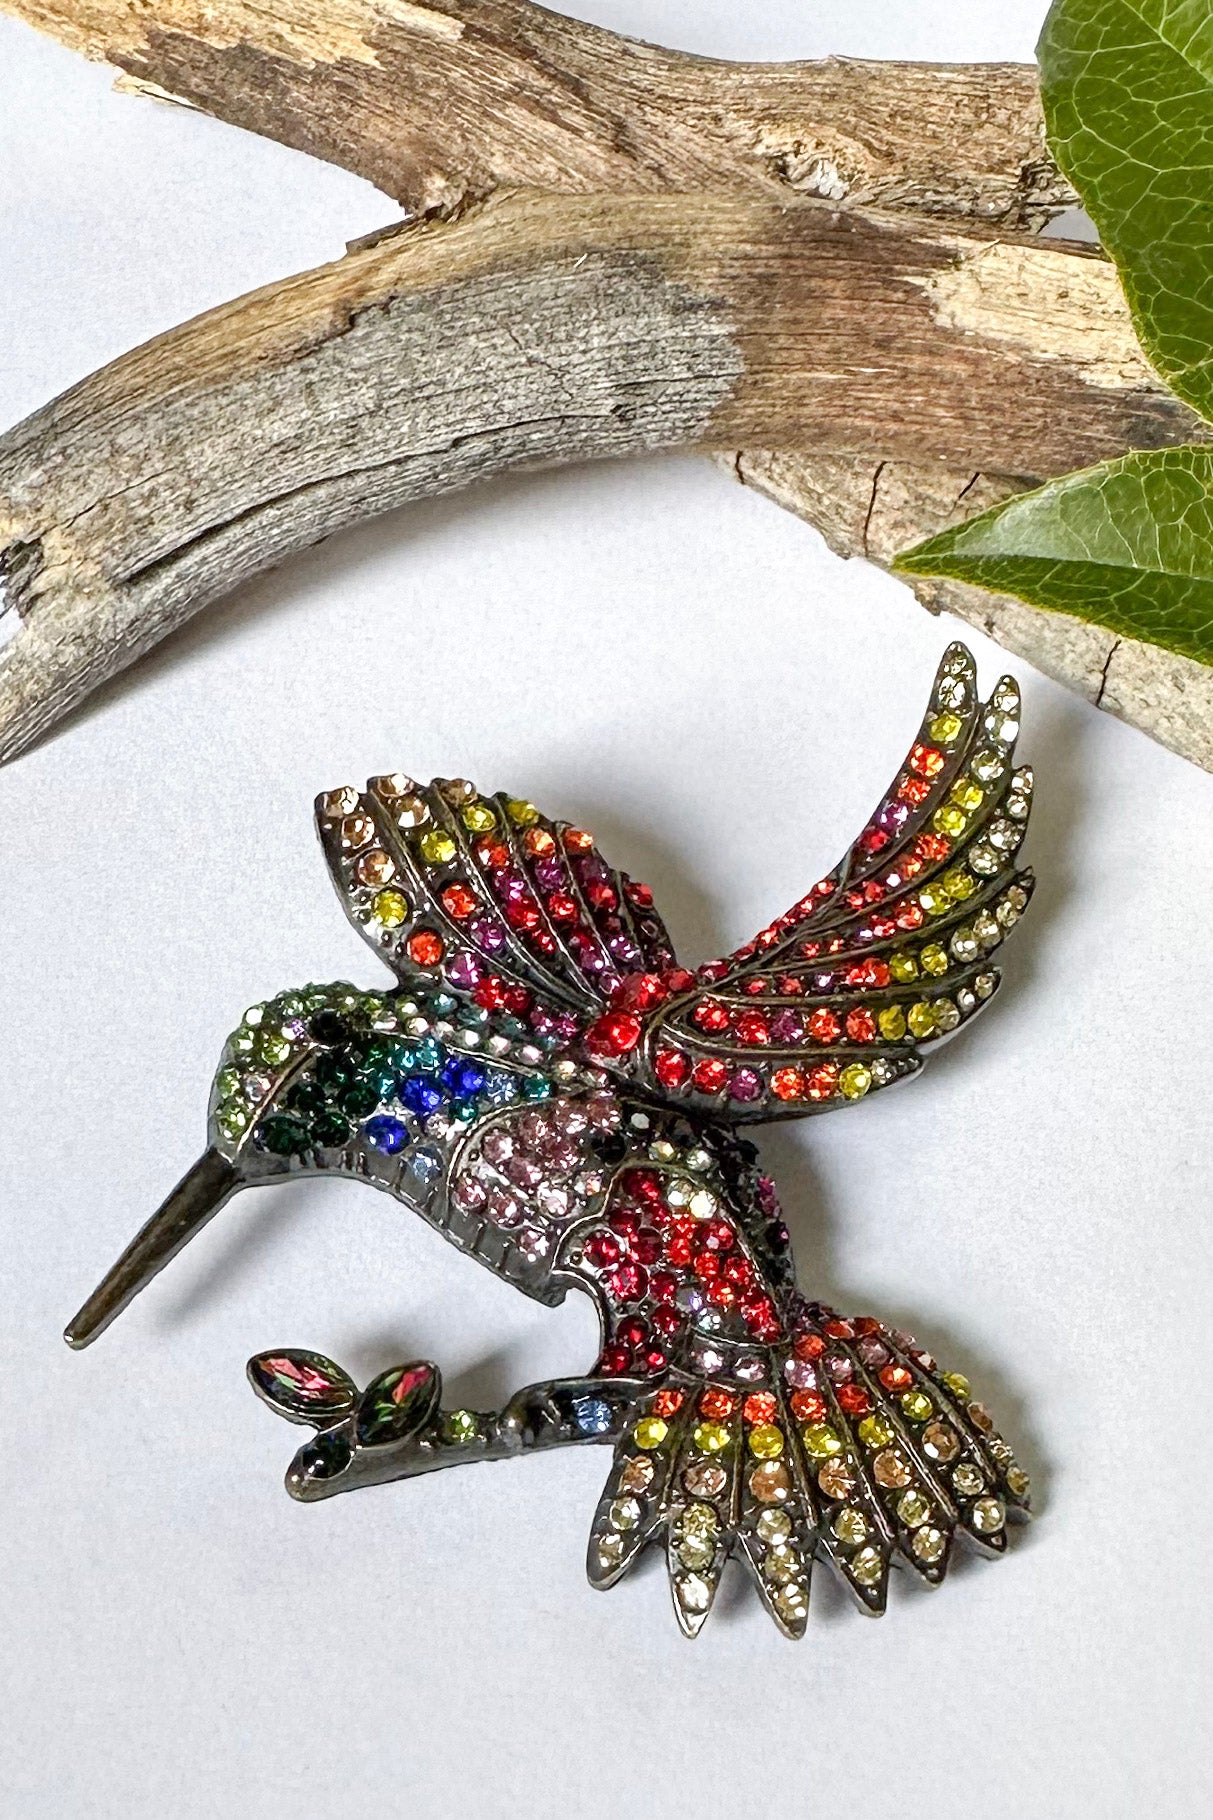 The Hummingbird Bedazzled Brooch - SpiritedBoutiques Boho Hippie Boutique Style Brooch, Metal Gallery